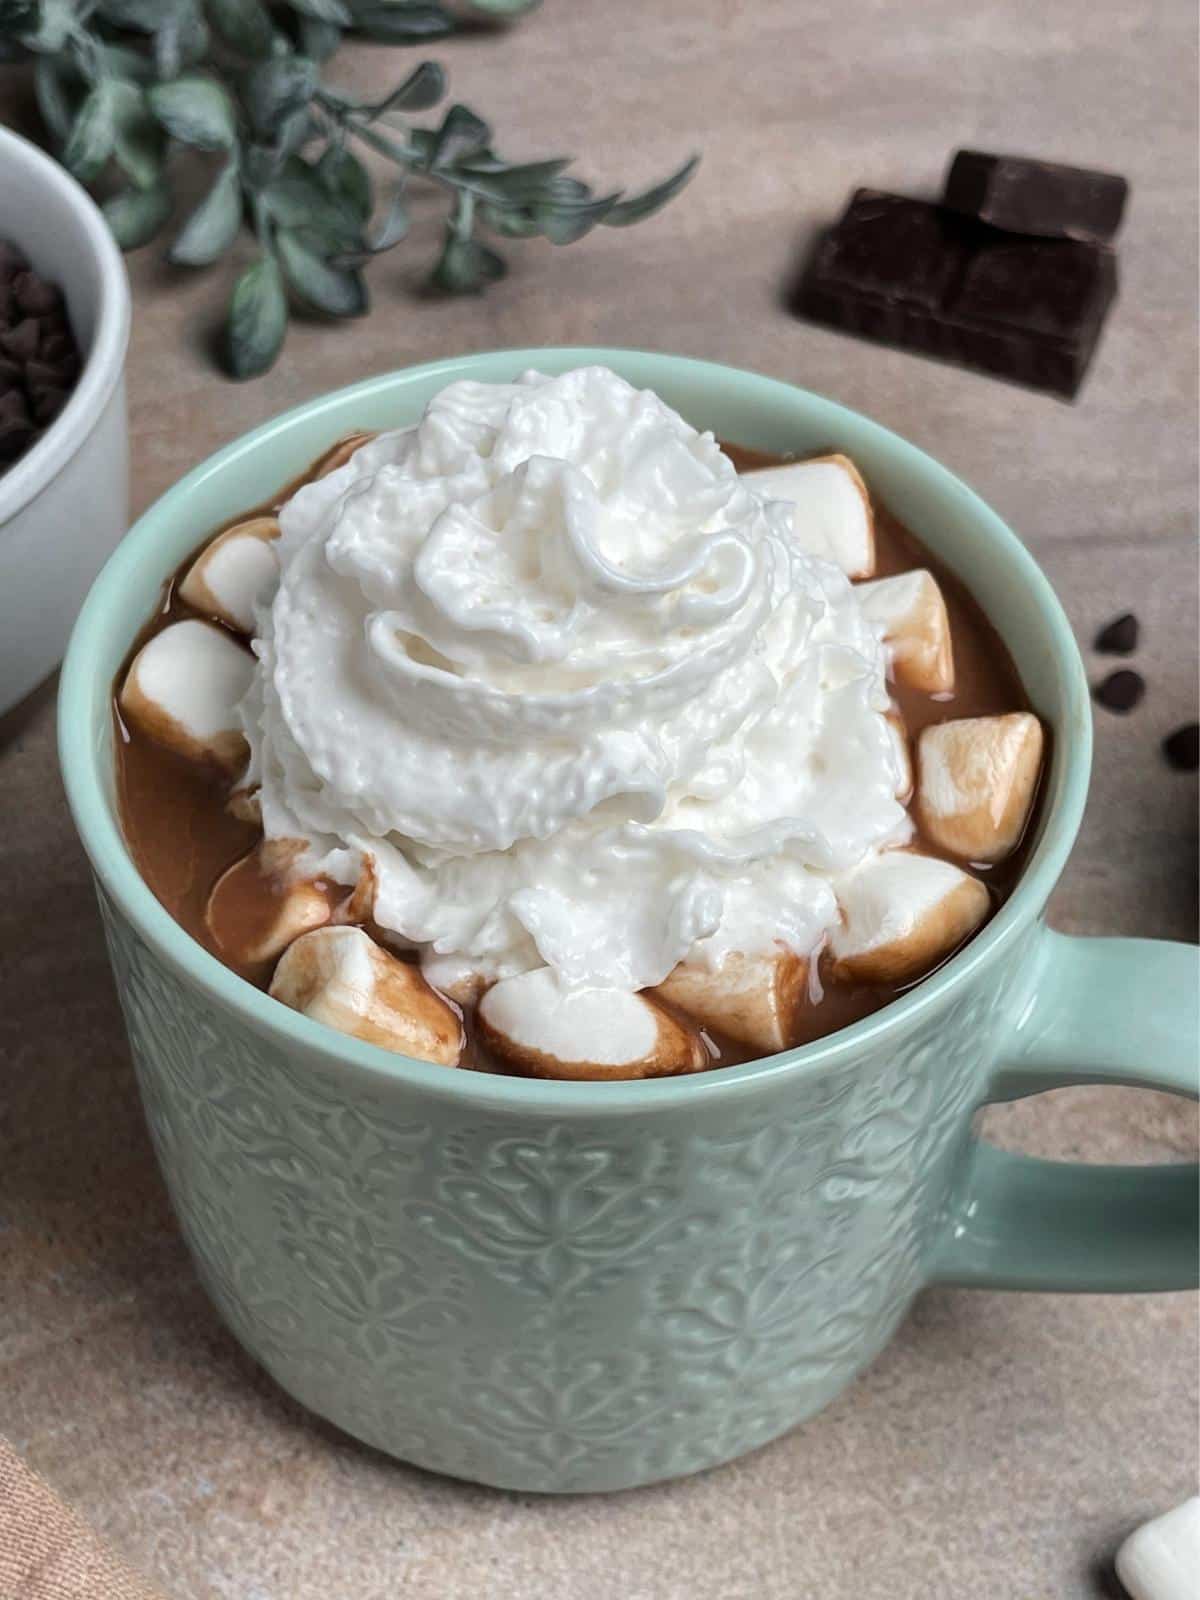 Hot chocolate with whipped topping.